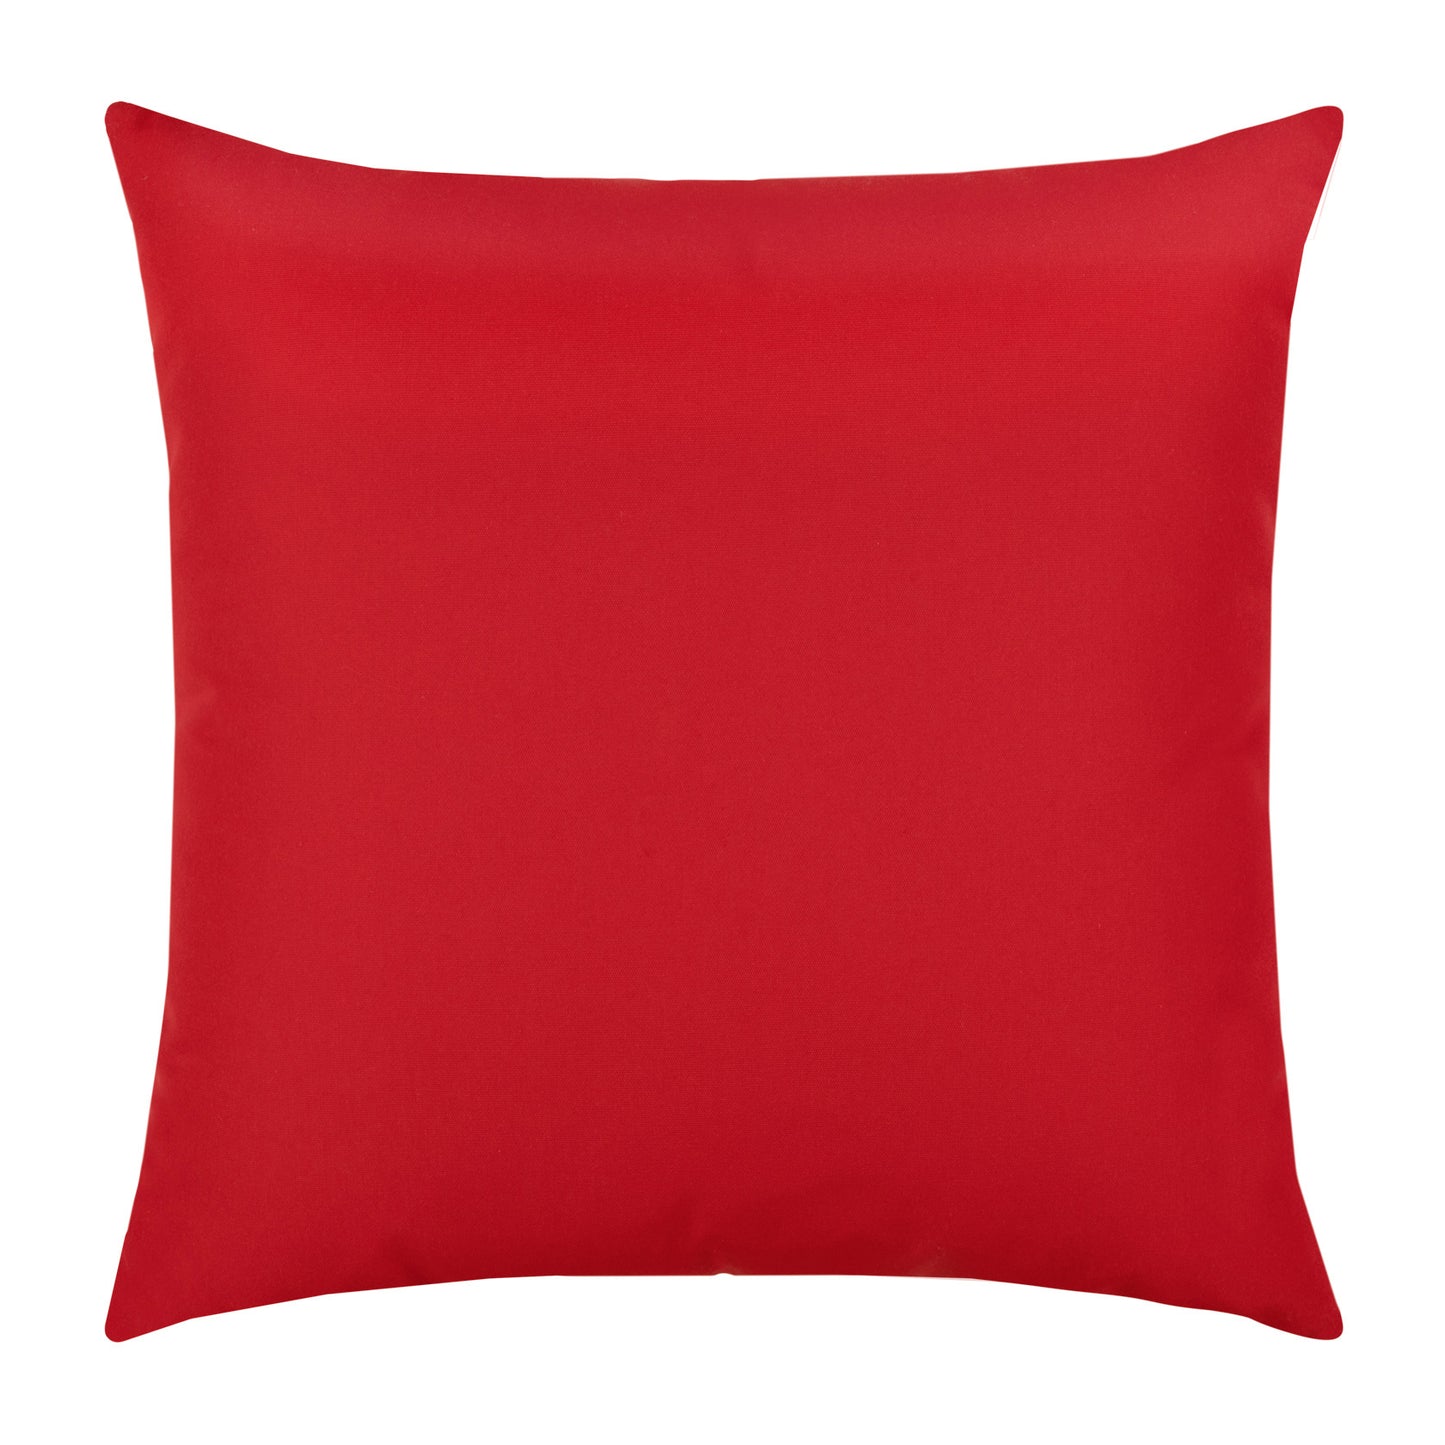 Elaine Smith 20 Square Pillow Canvas Logo Red, image 1